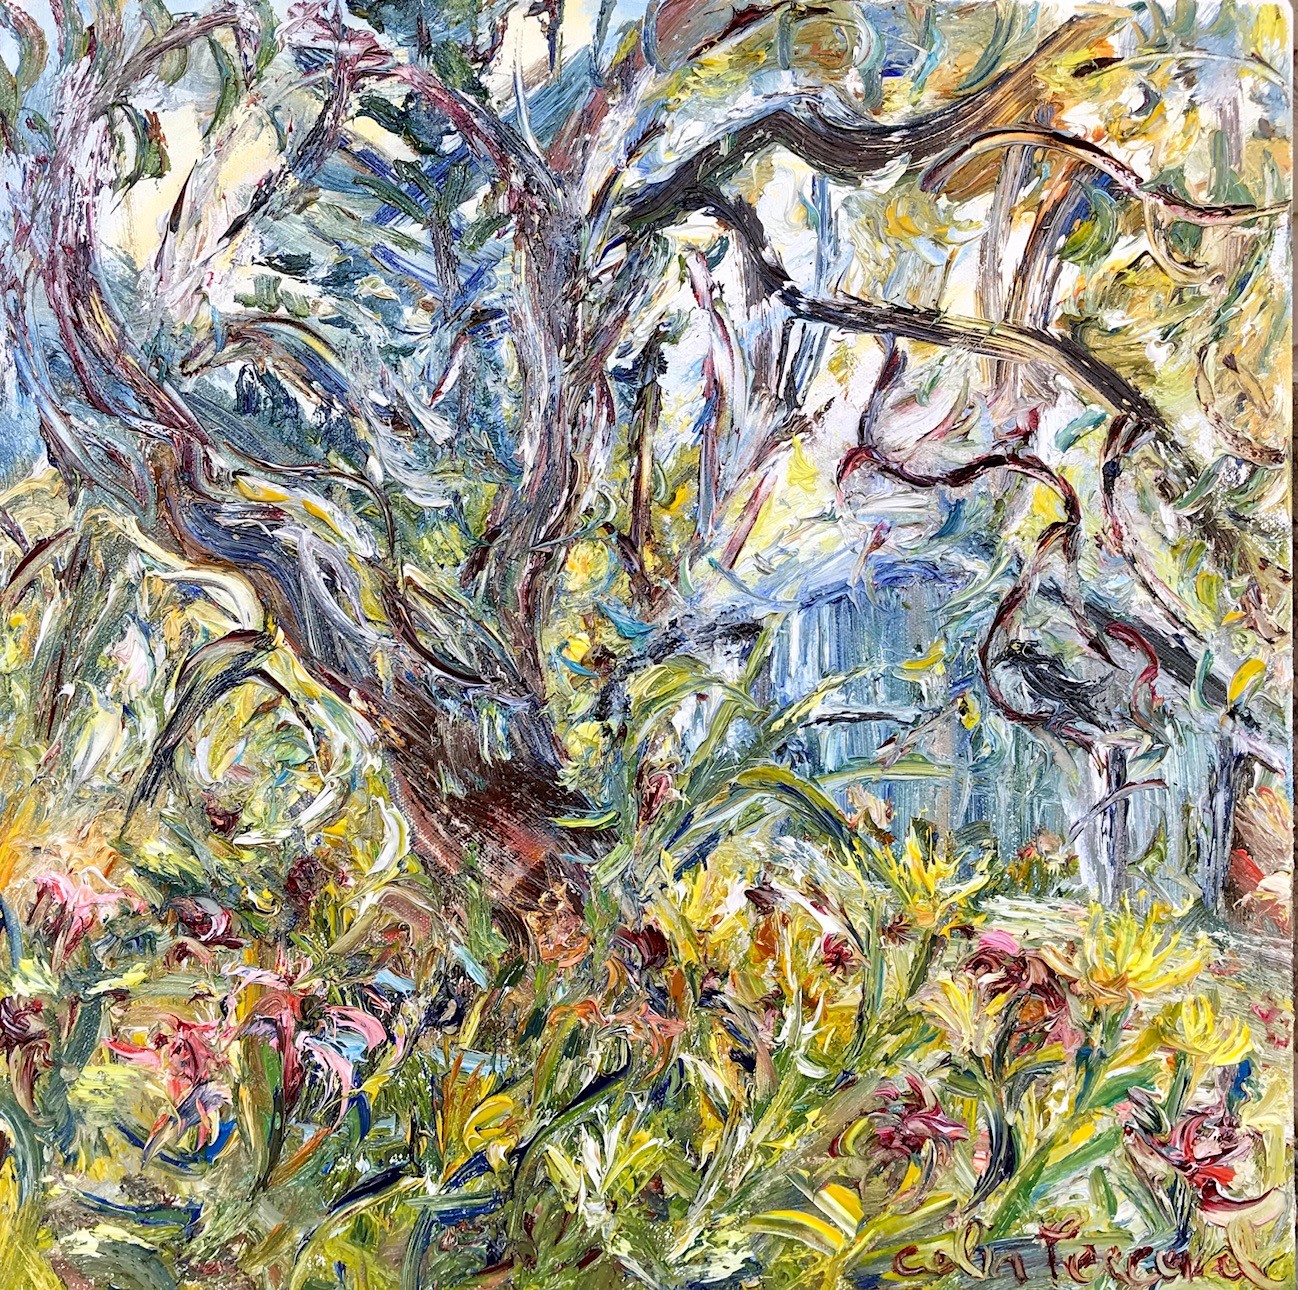 Celia Perceval 'Old Tree Over Polly's Shed with Flowers and Crow' oil on canvas 40 x 40cm $4,900